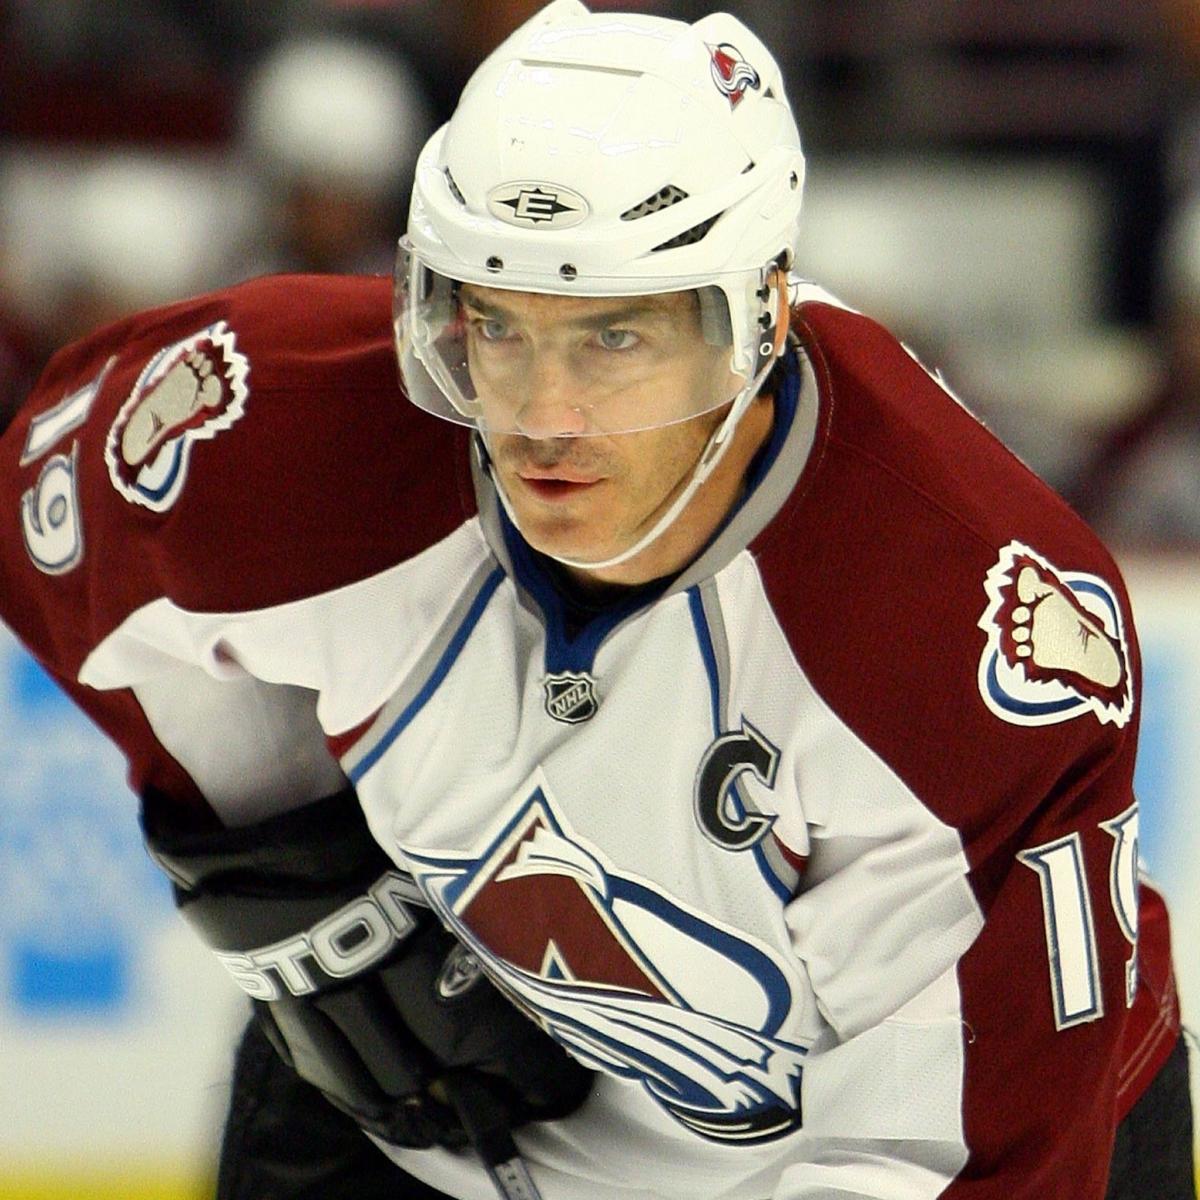 Joe Sakic hold the NHL record with 8 playoff overtime goals, Joe Sakic  hold the NHL record with 8 playoff overtime goals For more hockey, visit us  >